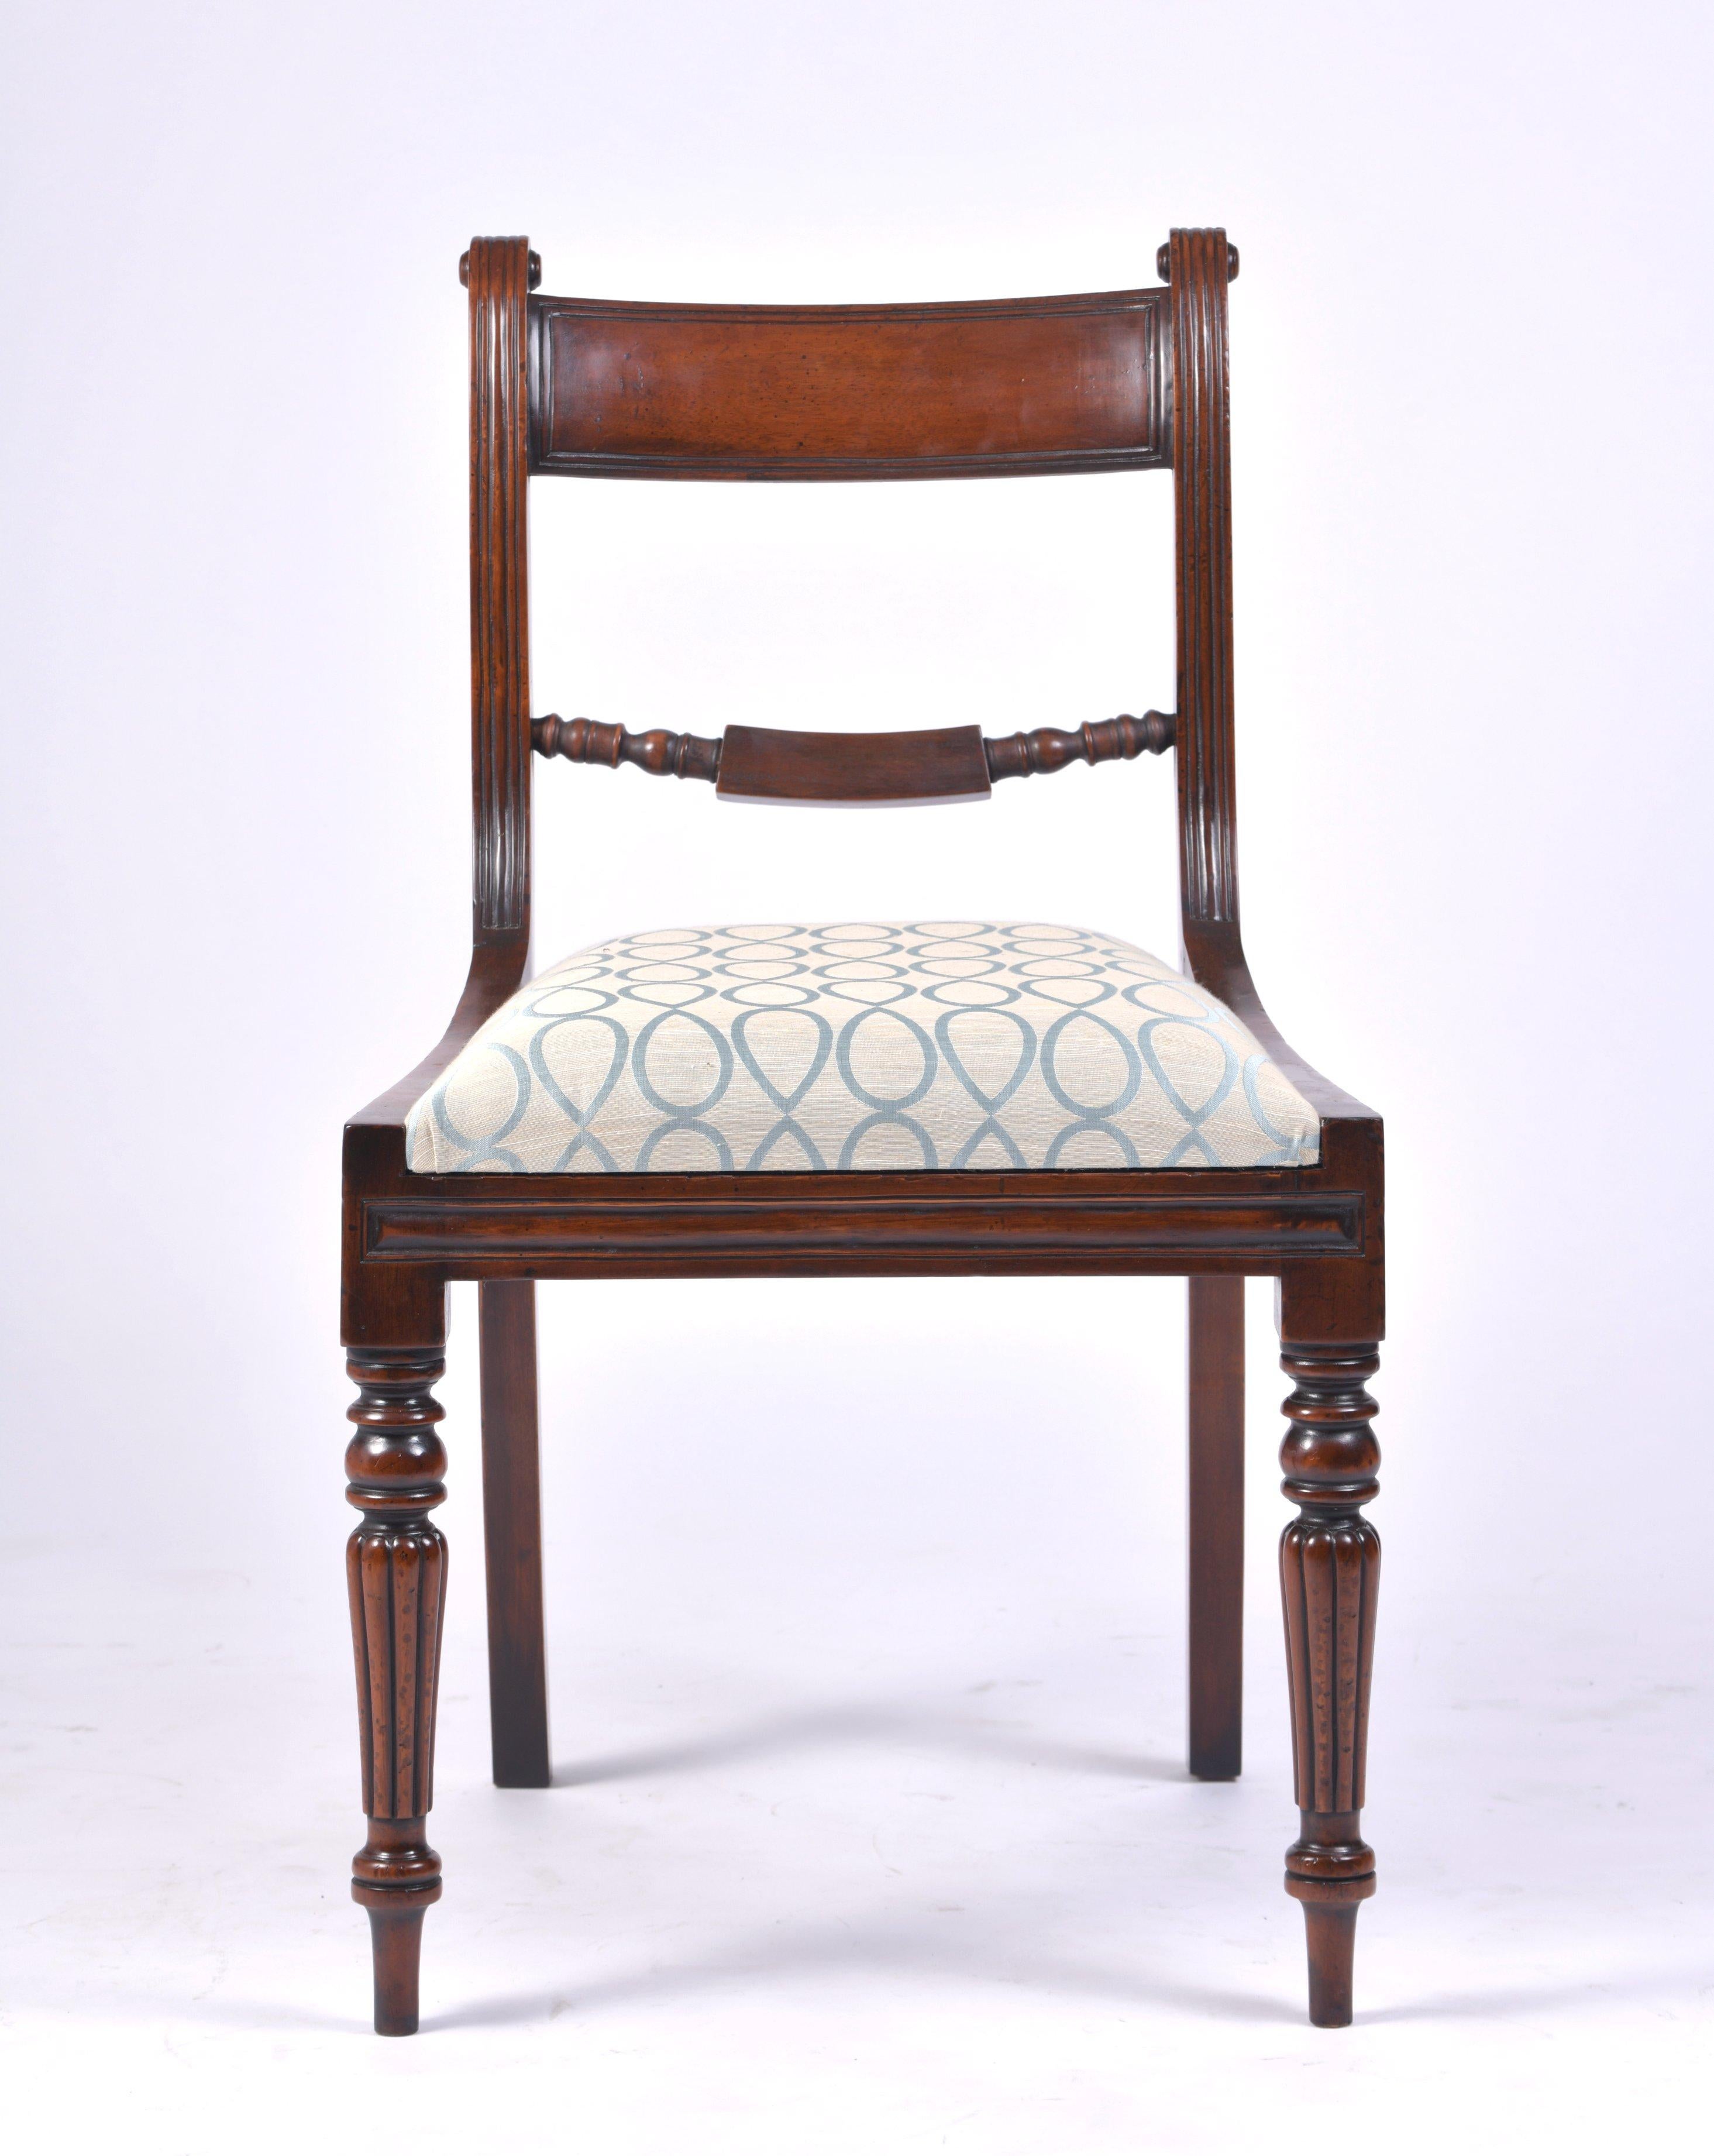 This superb and elegant set of 12 George VI style dining chairs feature 10 side chairs with 2 carvers. The chairs have turned front and swept back legs with a powder blue patterned upholstered seat. Each side chair measures 19 ¼ - 49 cm wide, 19 in